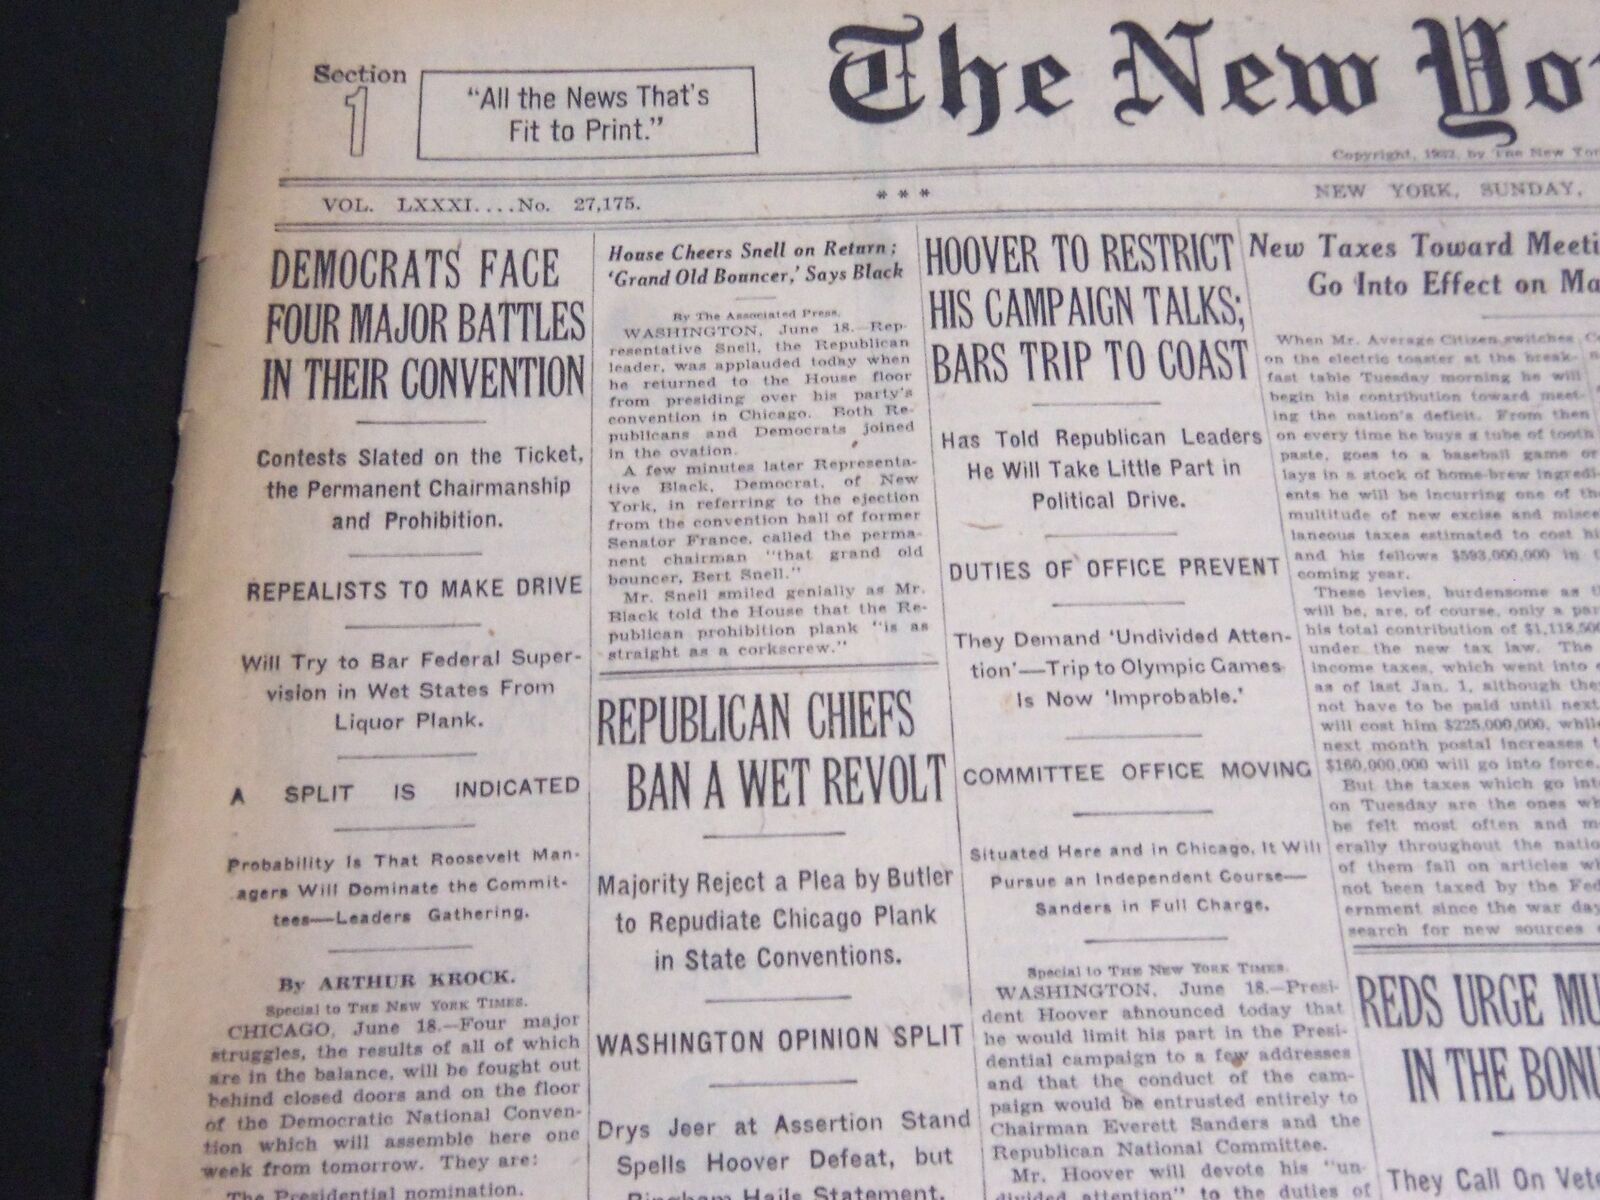 1932 JUNE 19 NEW YORK TIMES - DEMOCRATS FACE FOUR BATTLES AT CONVENTION- NT 6990